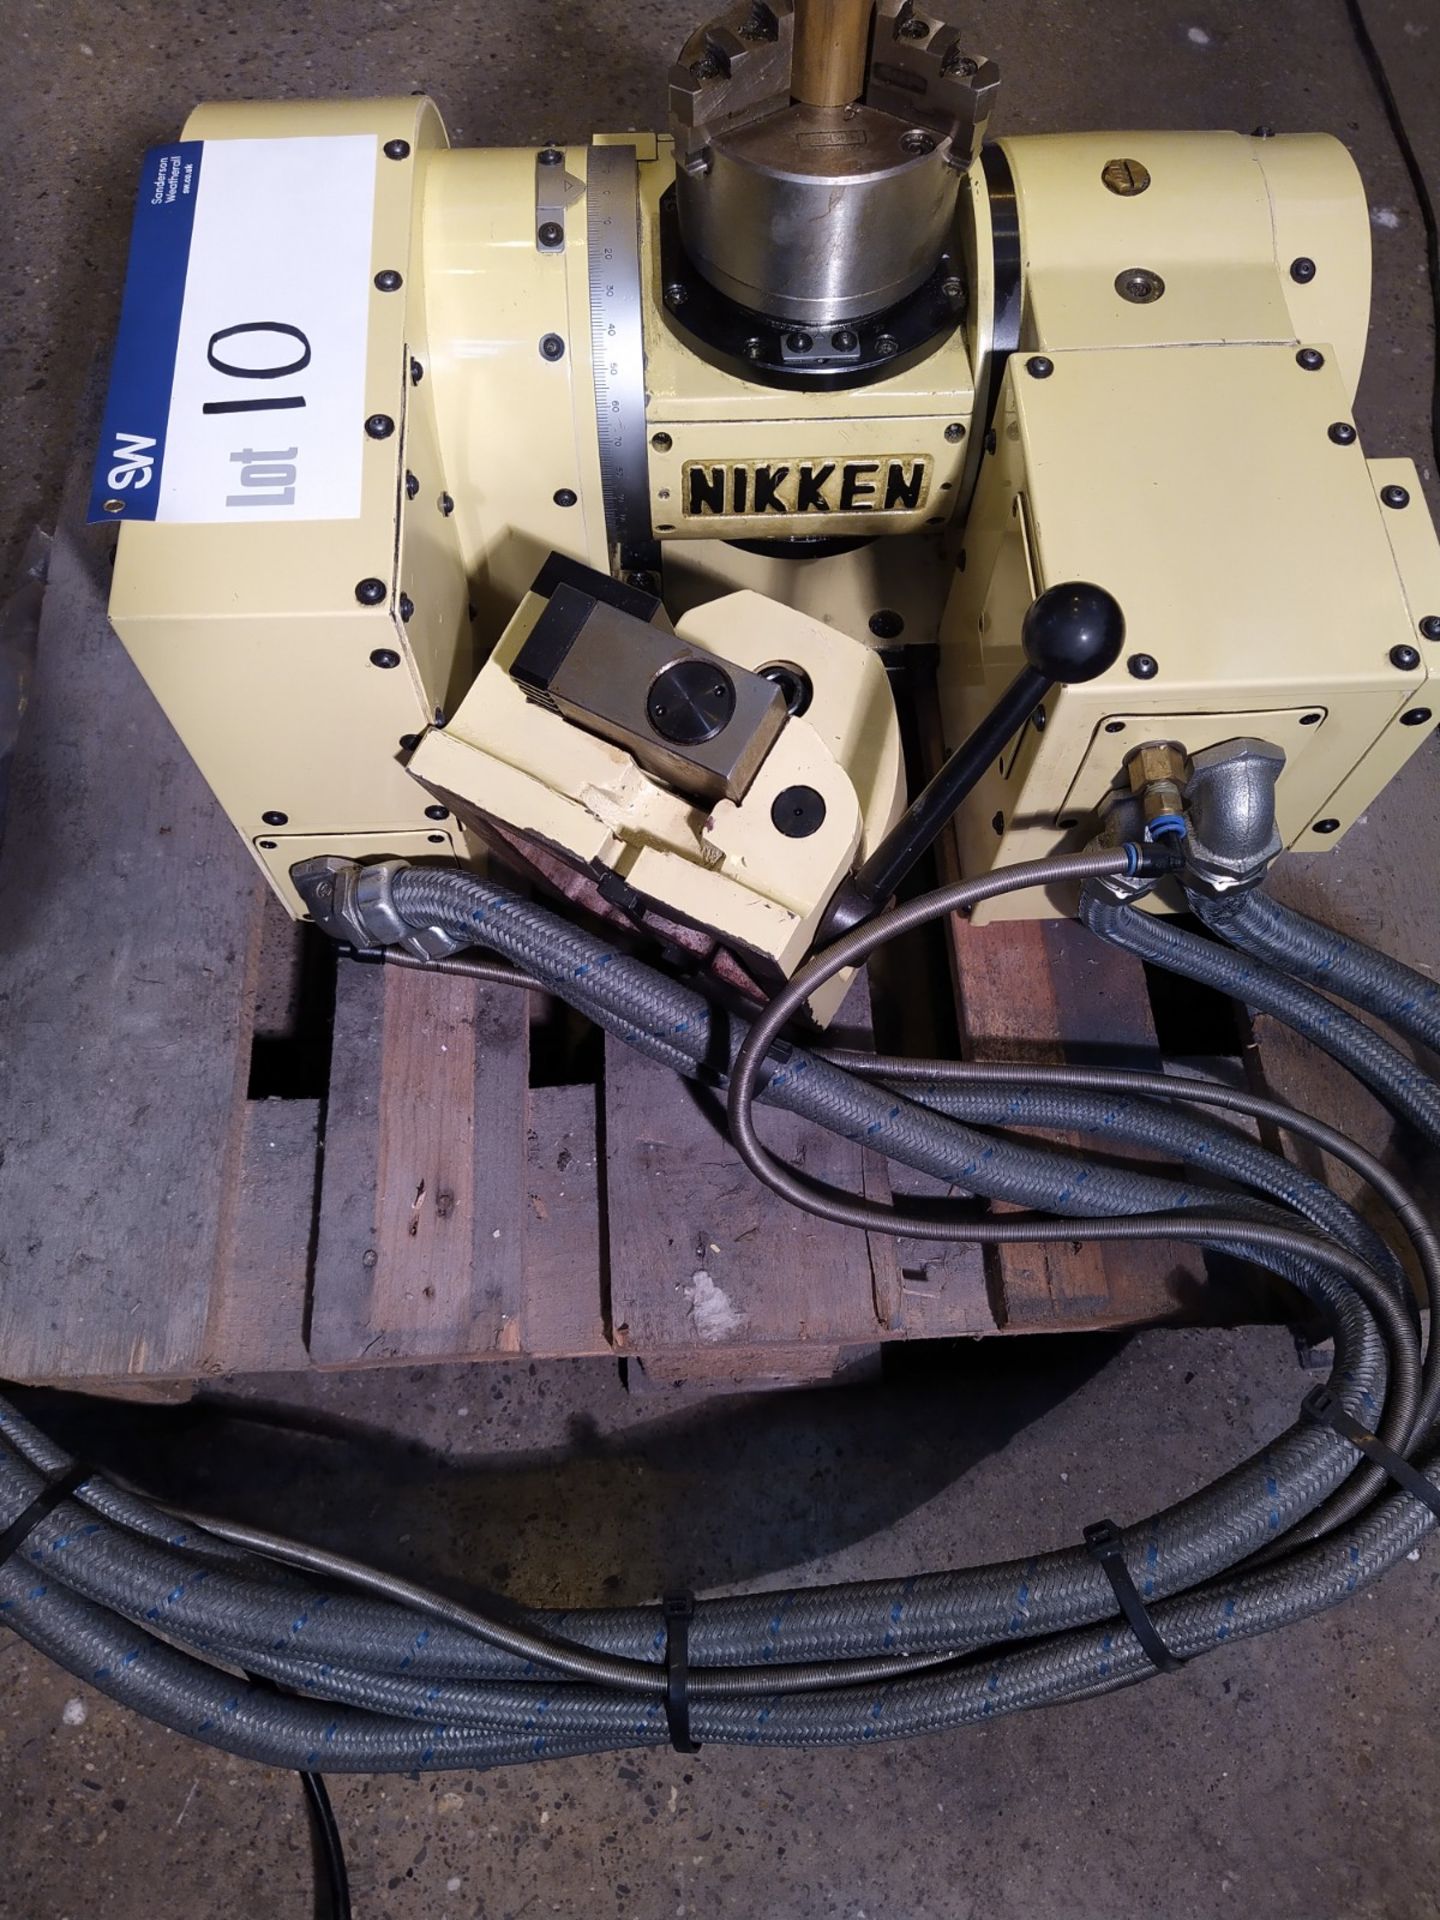 Nikken 5AX1200 / 9219-02350 COMPACT TILTING ROTARY TABLE, serial no. 0003R / H42500, year of - Image 7 of 8